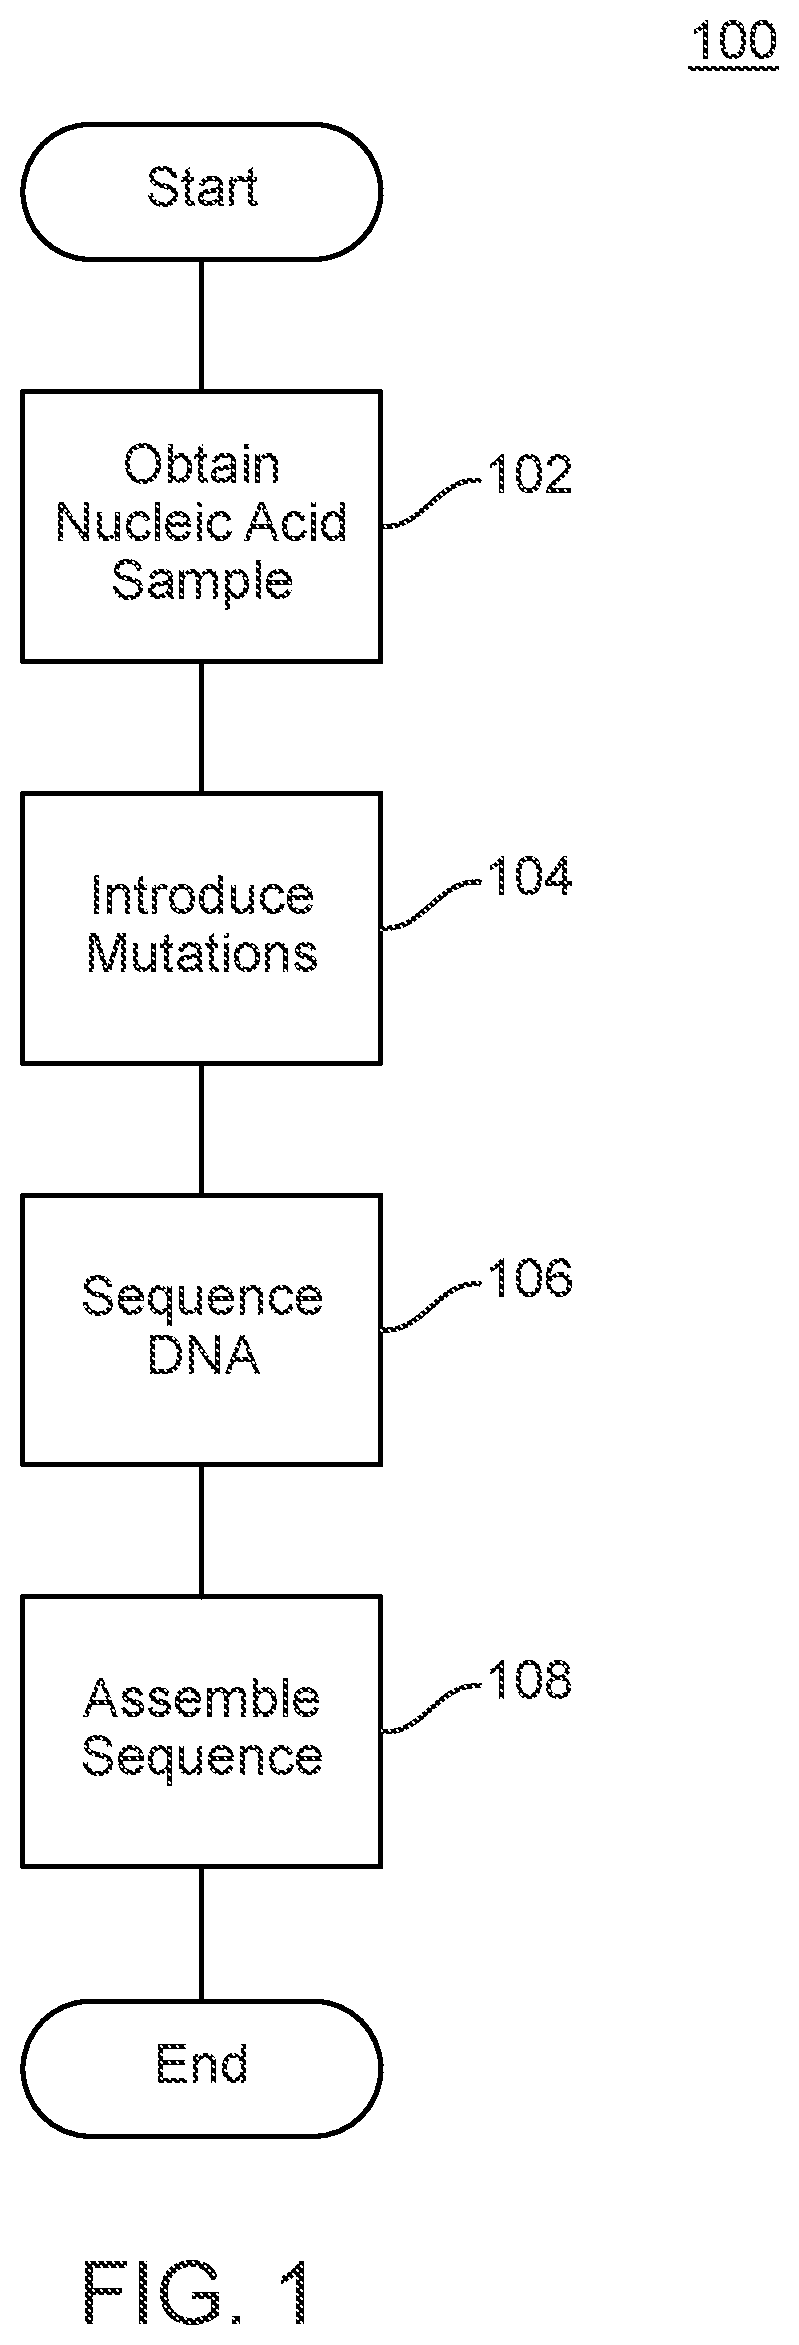 Methods and uses of introducing mutations into genetic material for genome assembly